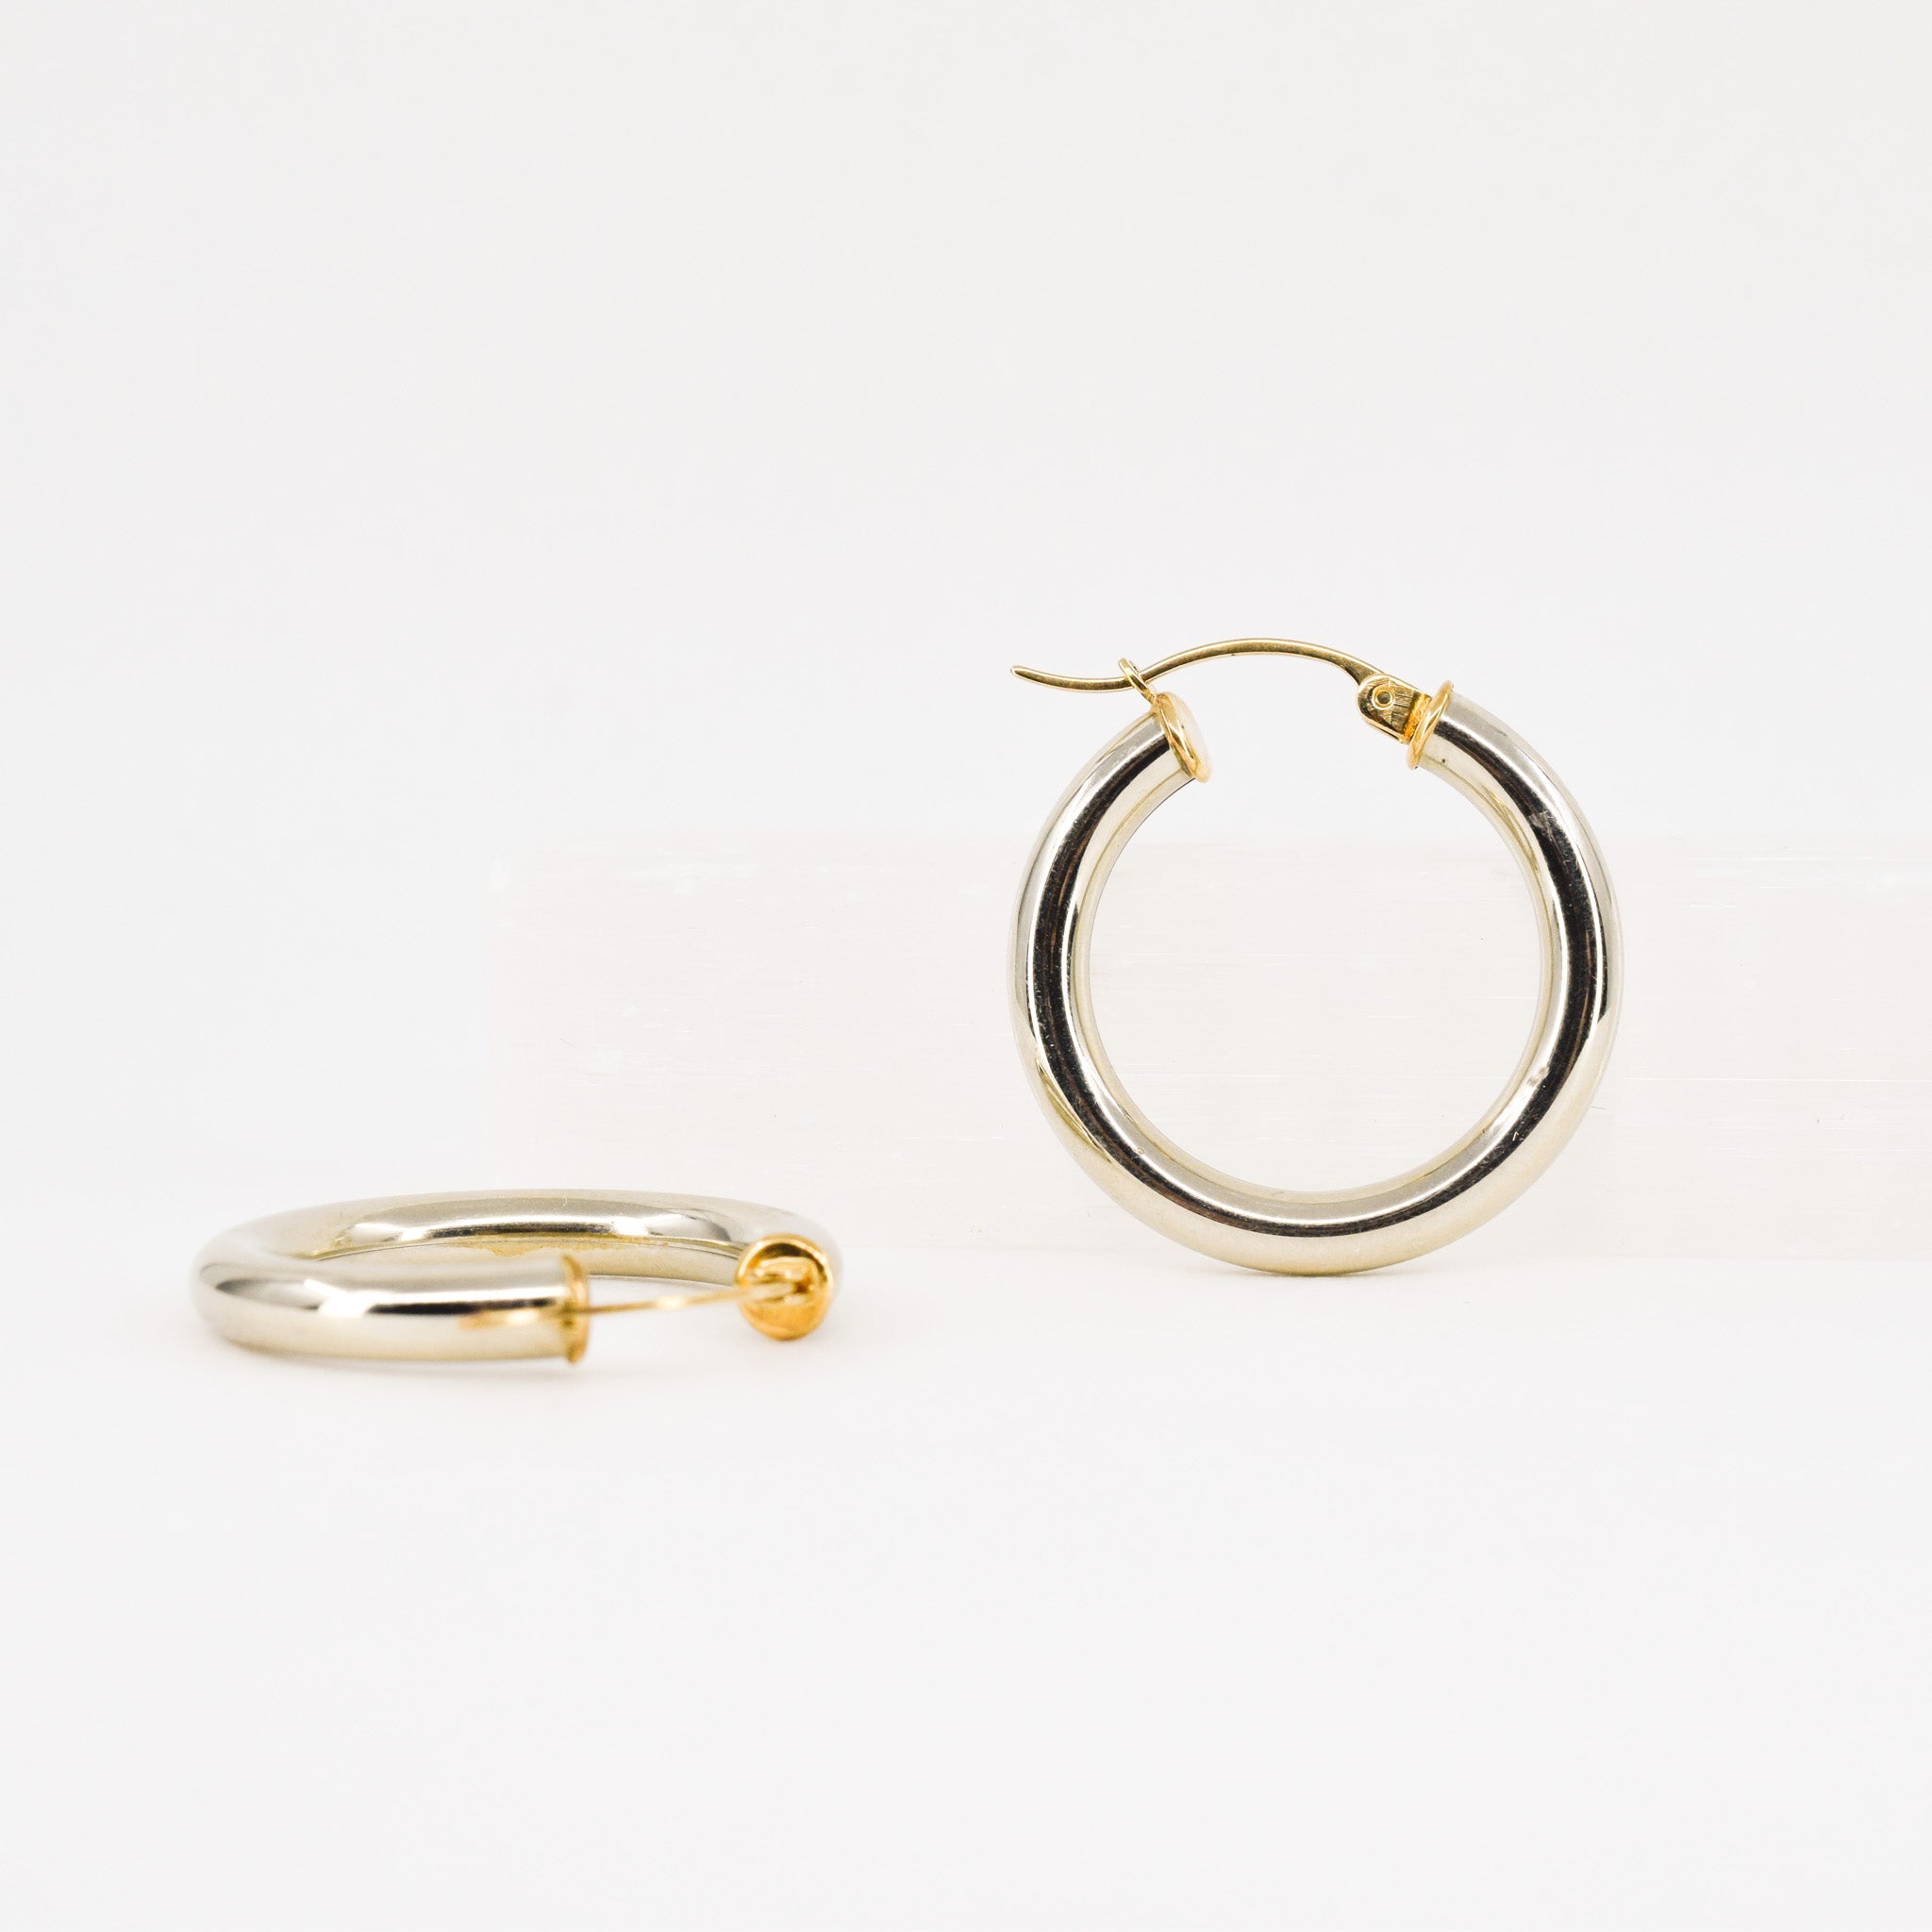 vintage gold two toned hoops earrings, folklor vintage jewelry canada